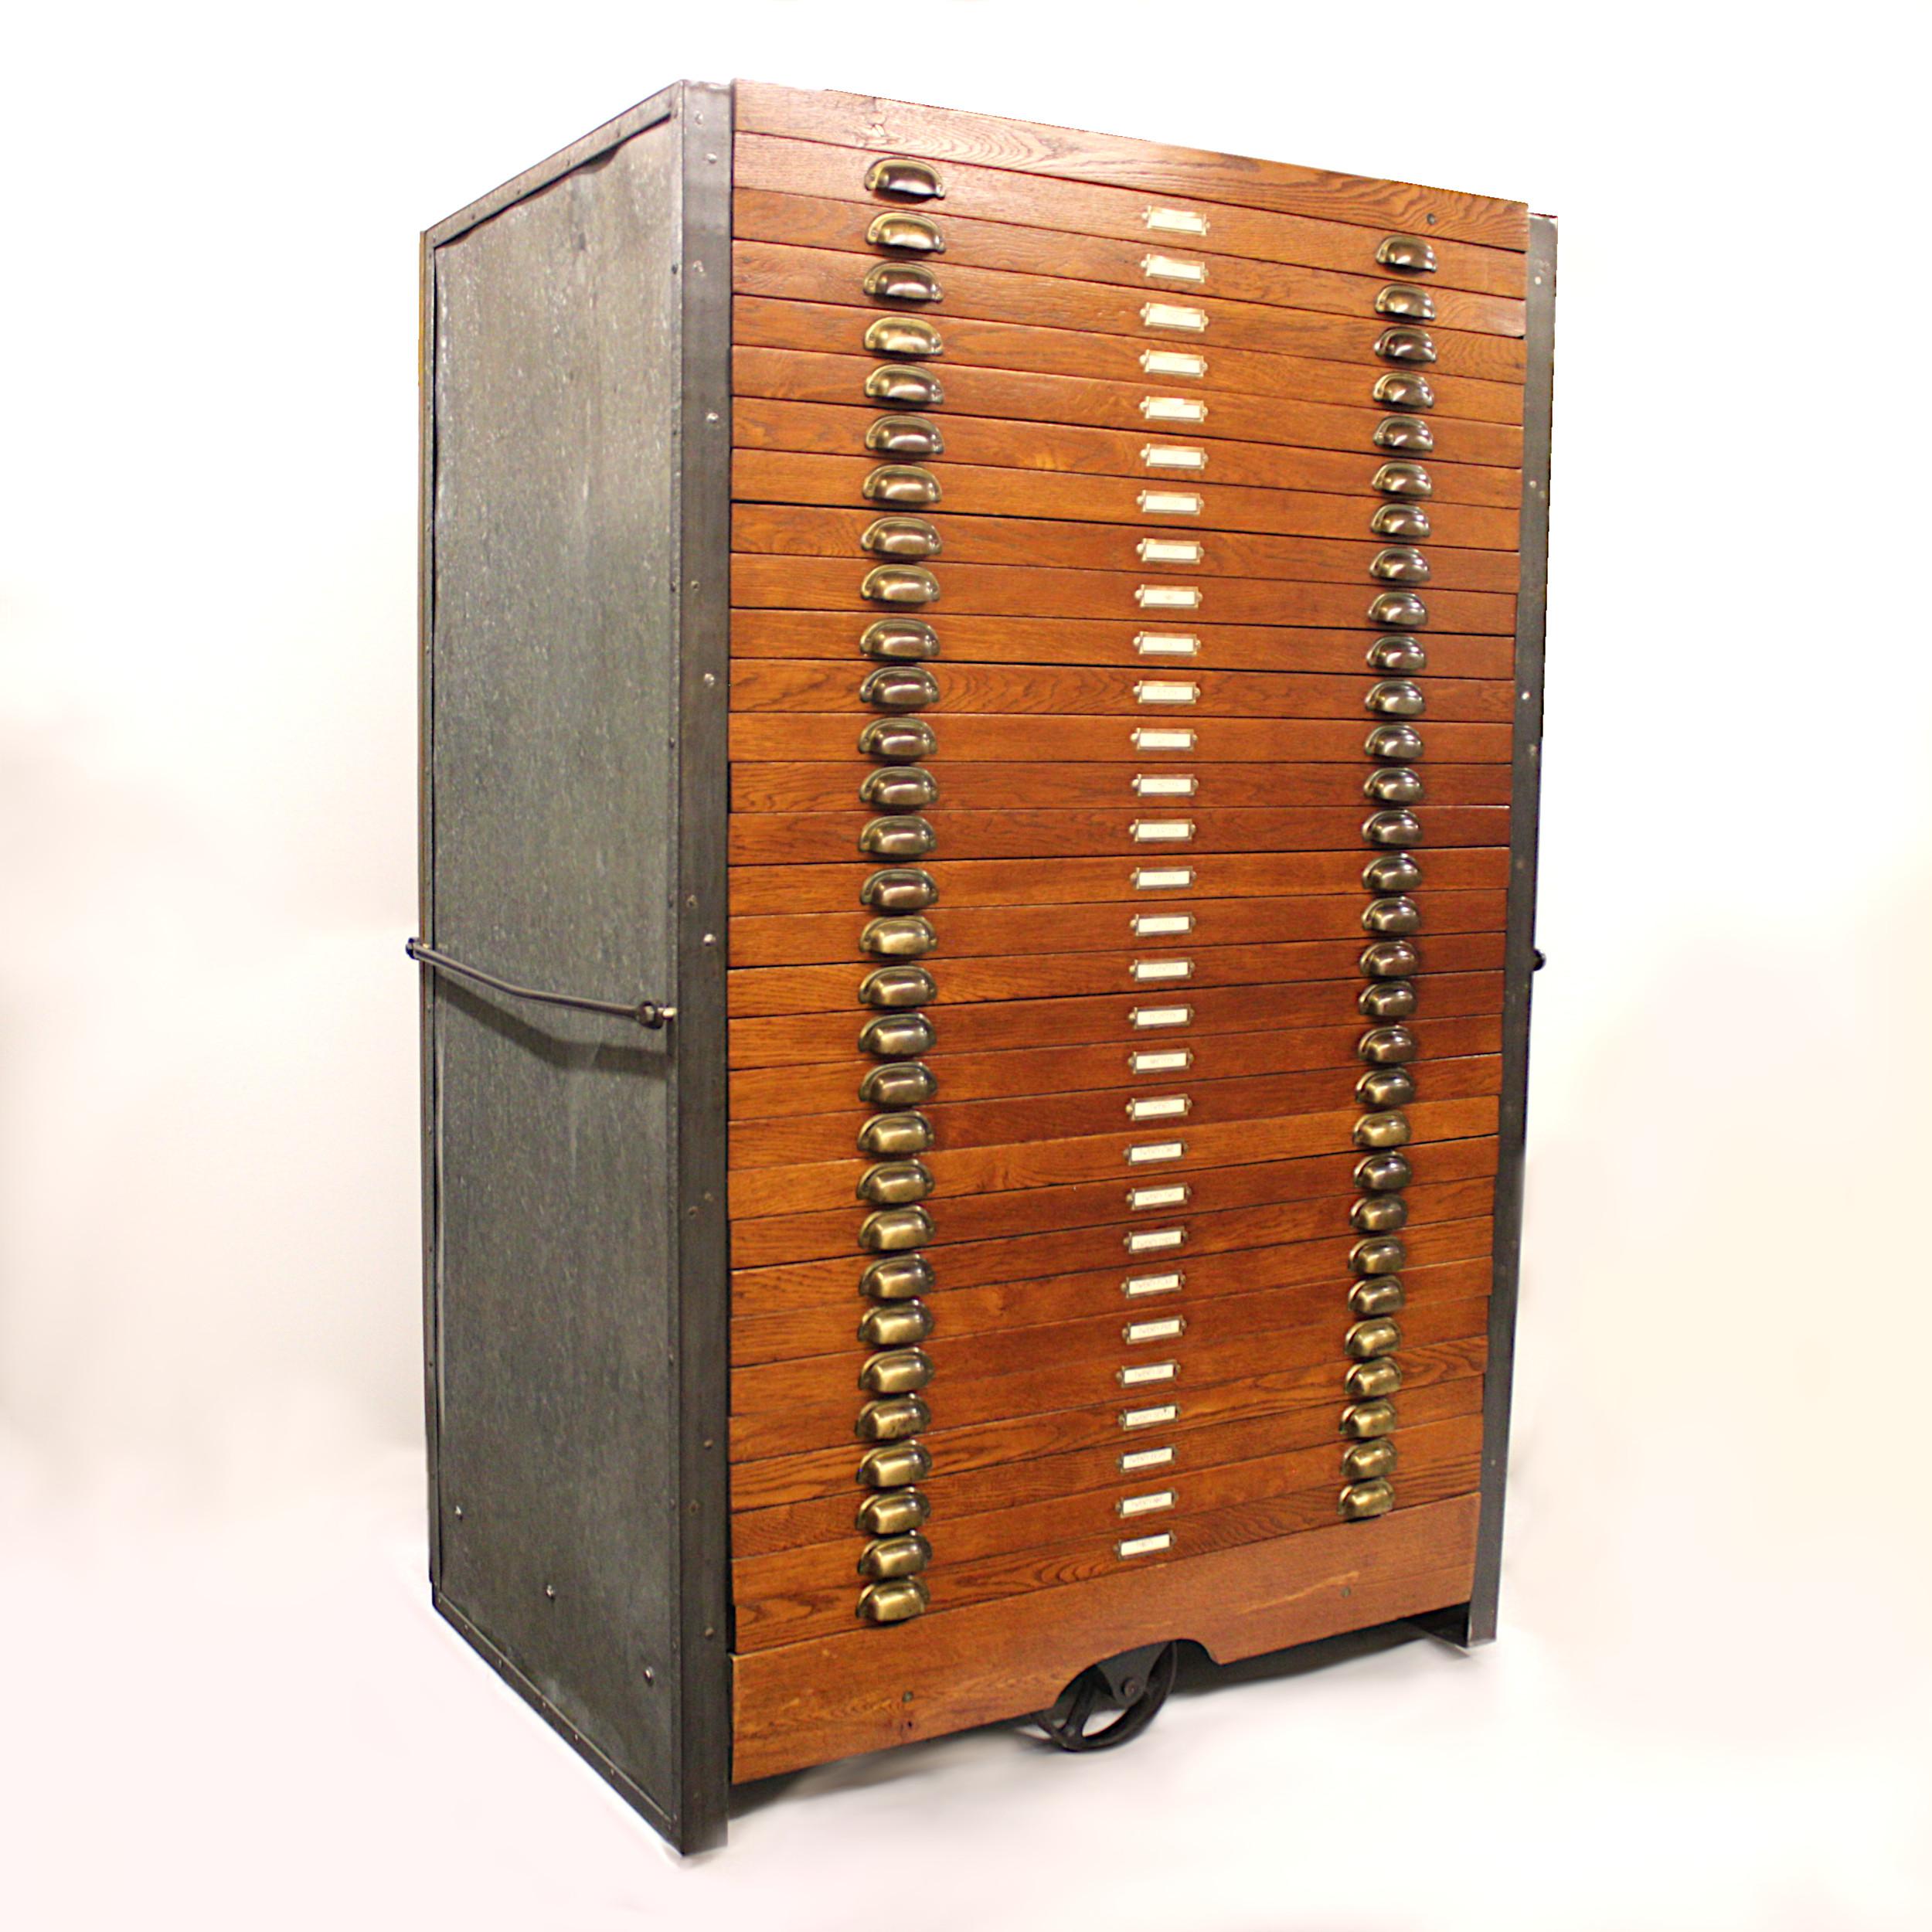 This is a one-of-a-kind rolling flat file cabinet custom made in the late 1940s. Cabinet features the perfect mix of oak, galvanized steel, iron and brass. Standing a full 72